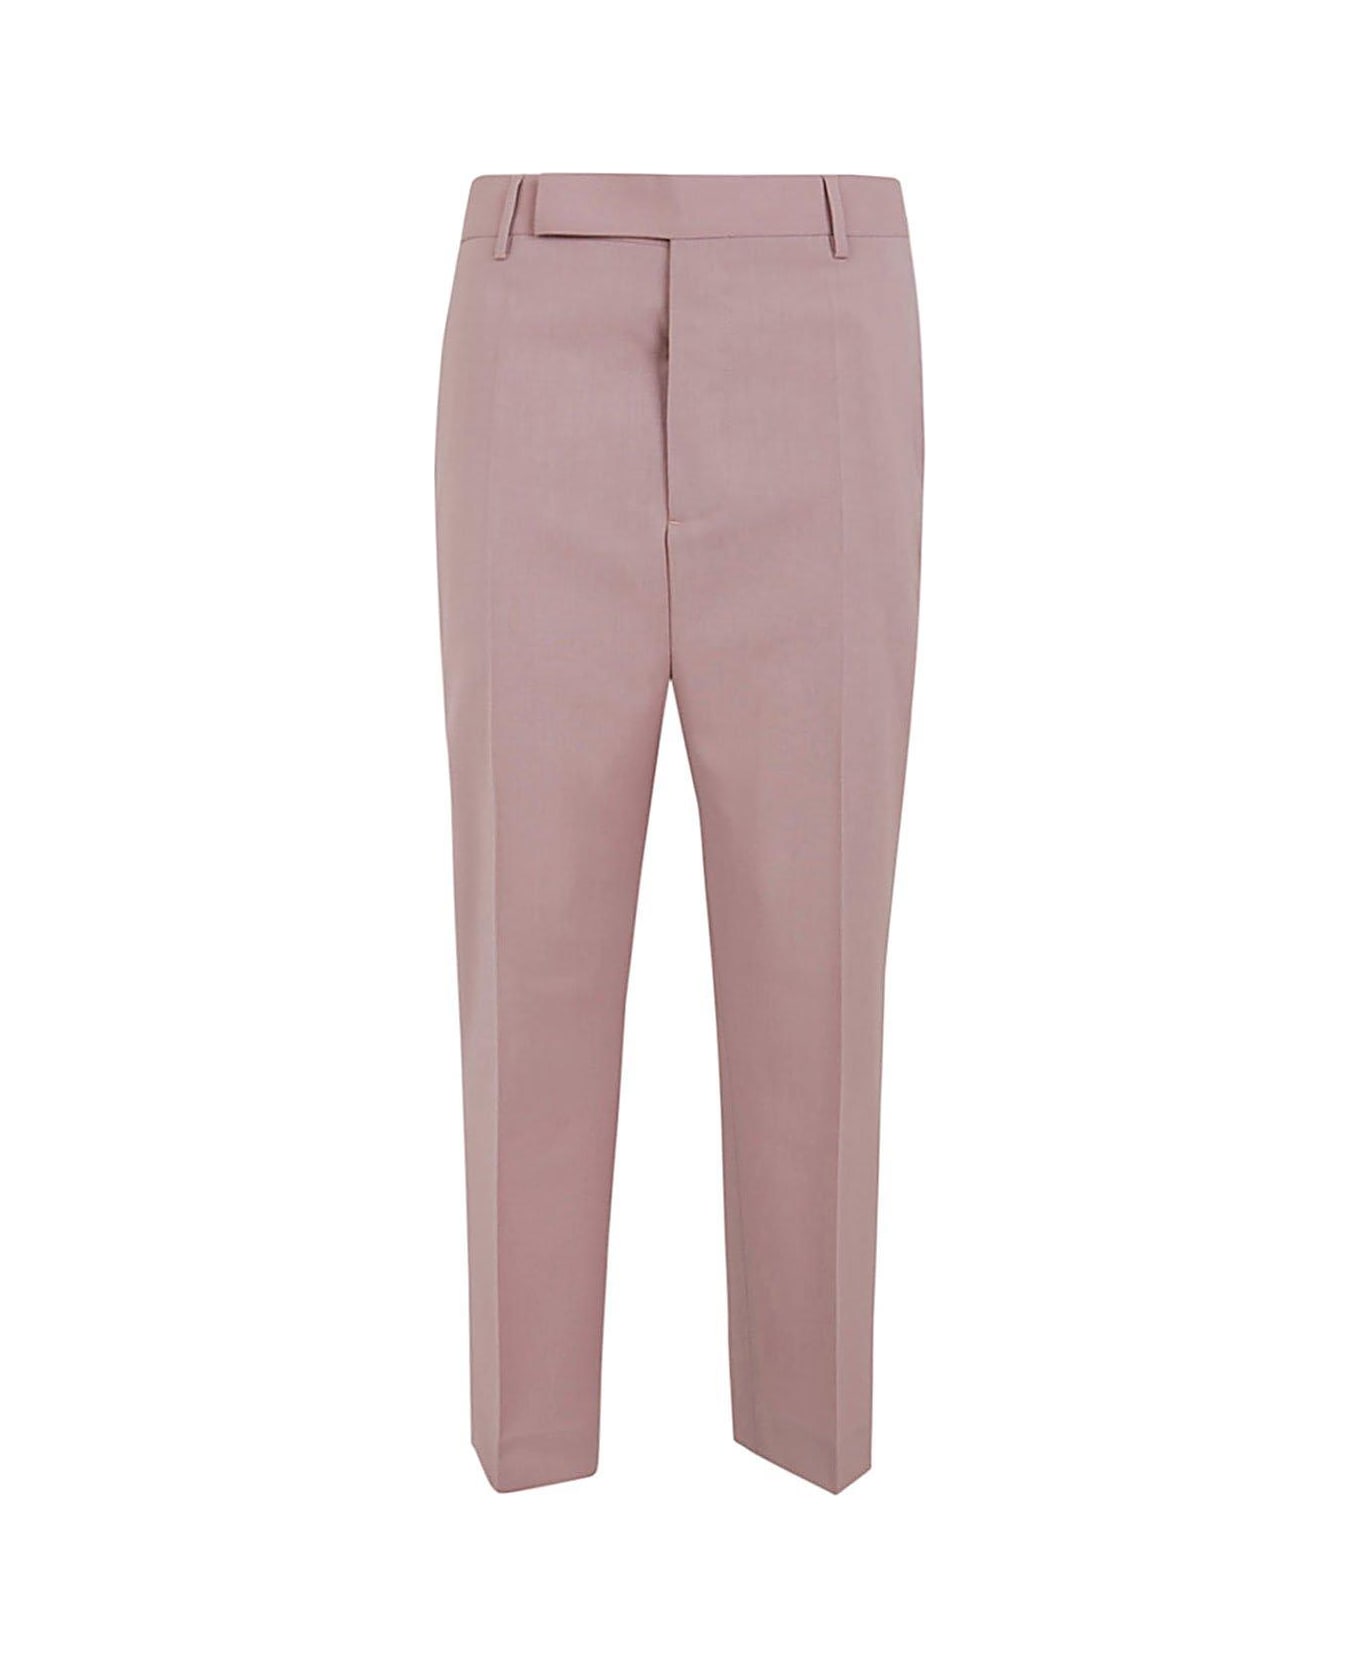 Rick Owens Straight-leg Cropped Tailored Pants - DUSTY PINK